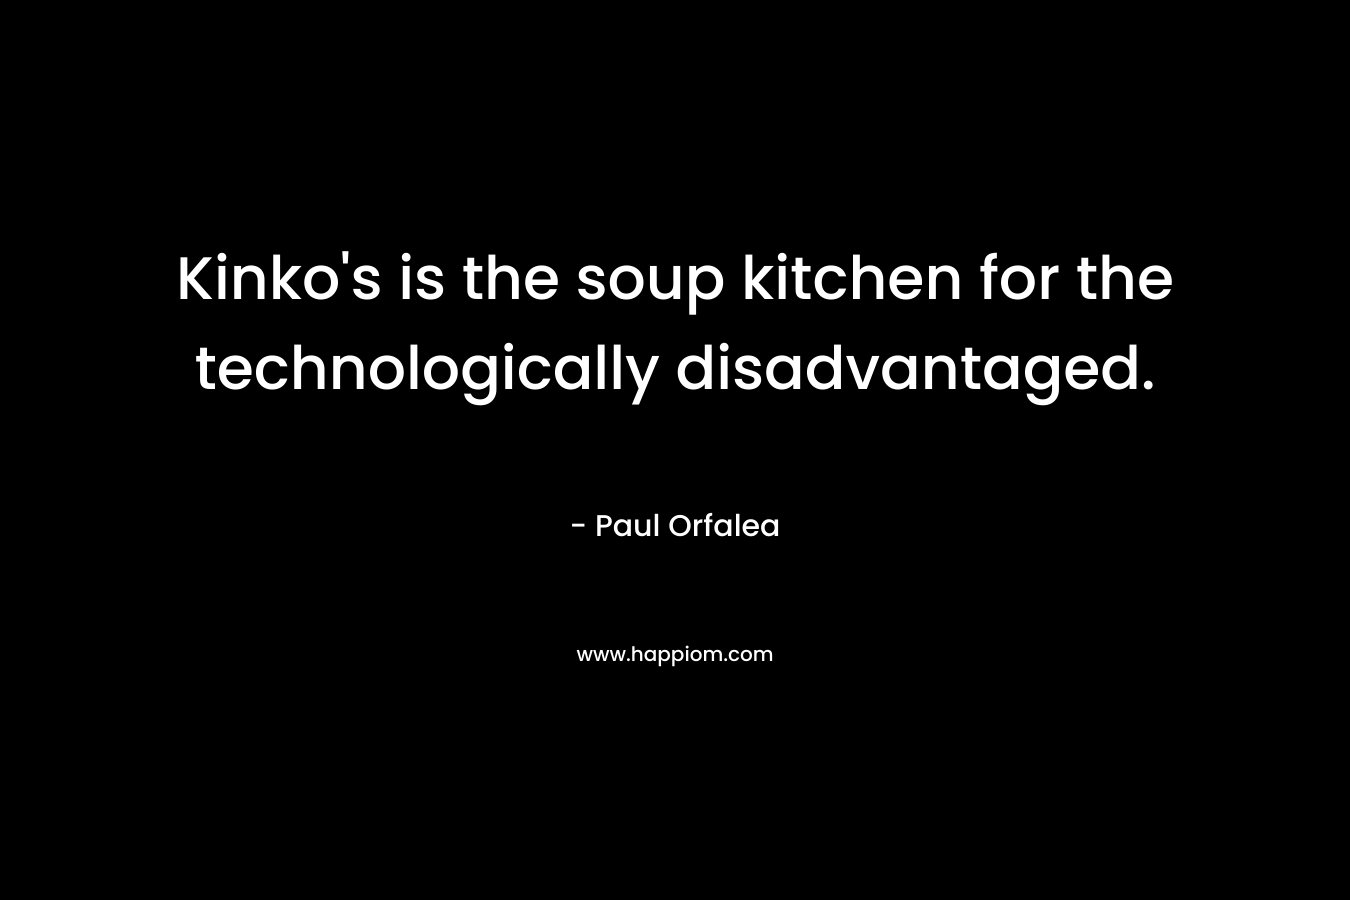 Kinko's is the soup kitchen for the technologically disadvantaged.